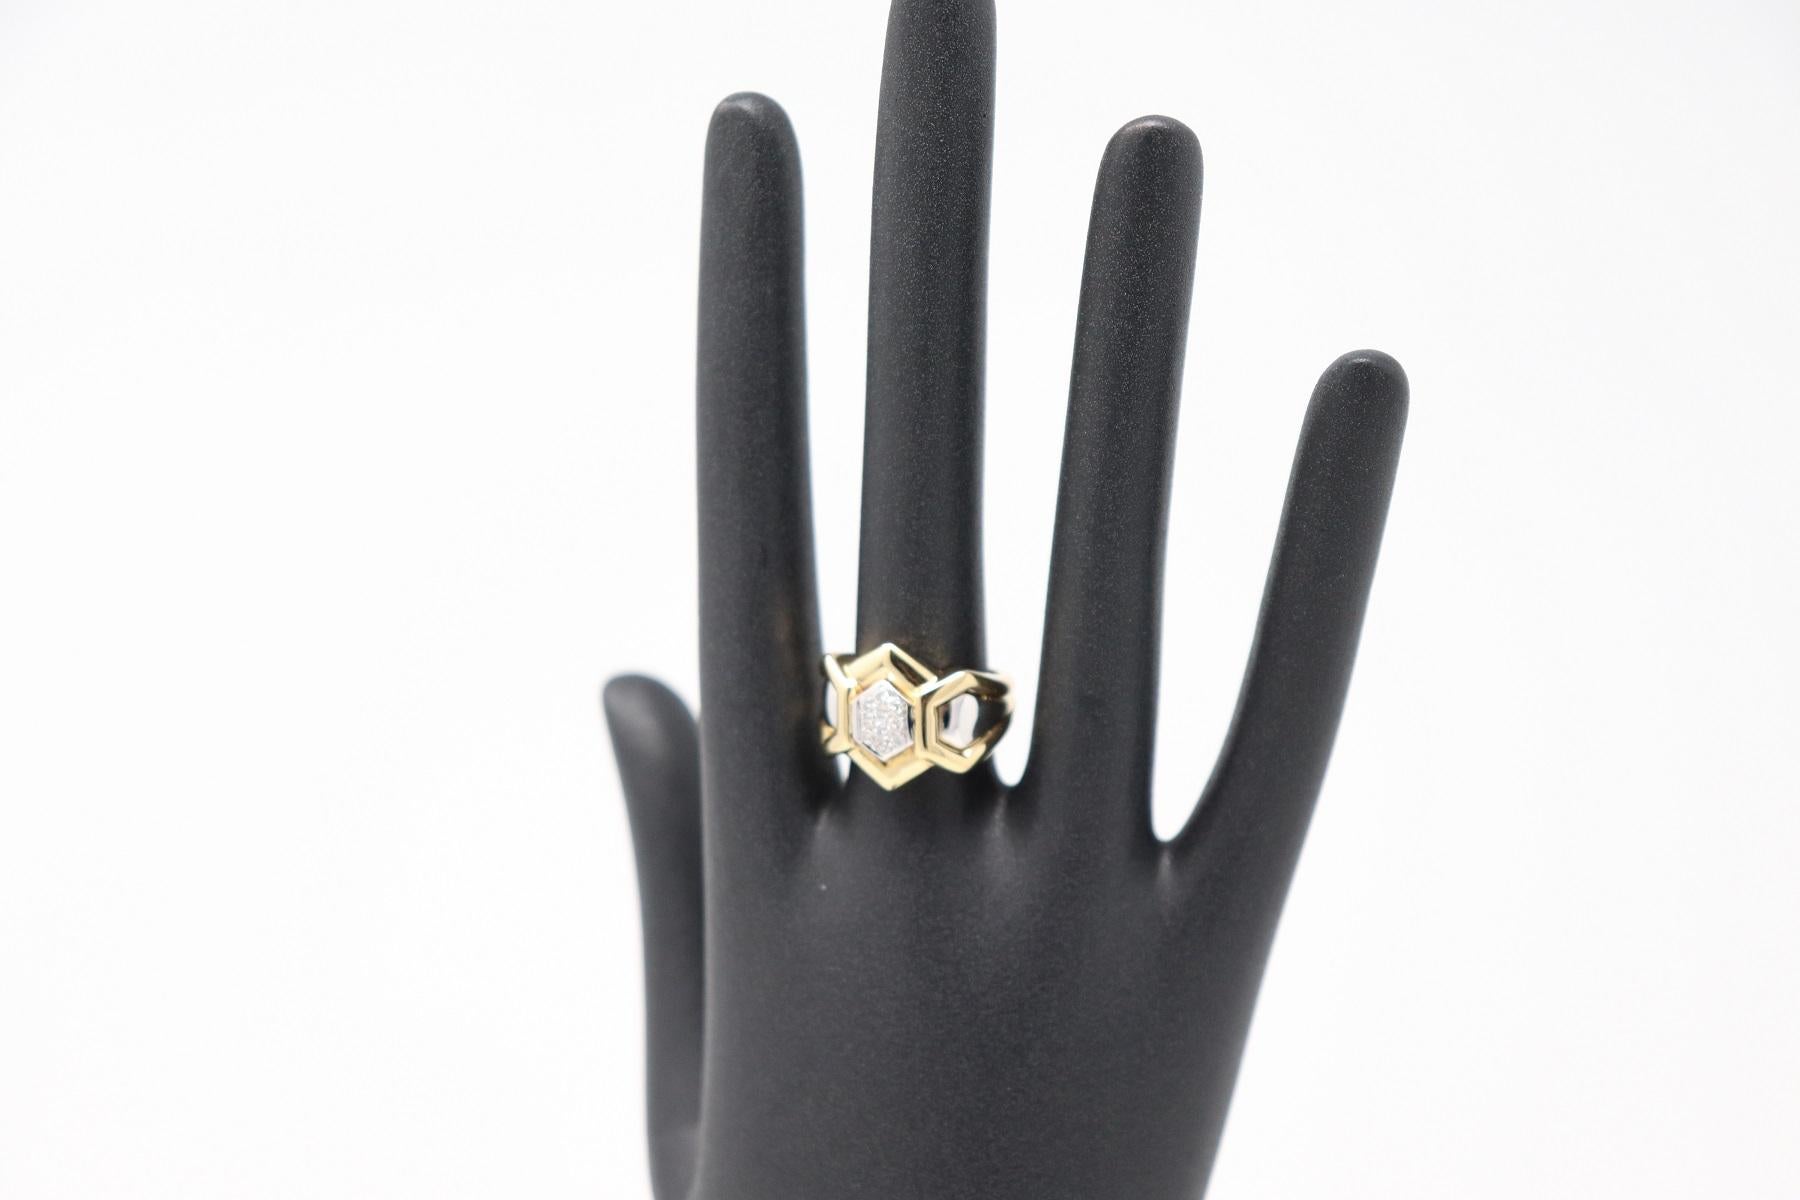 Signert Ring in yellow gold 0.12 carat diamonds. Italian designer Gianni Carità. With original packaging of the Griffe.
Standard Italy ring size 15 please look at the photo with conversion ring measures for each country.
This ring is perfect for a